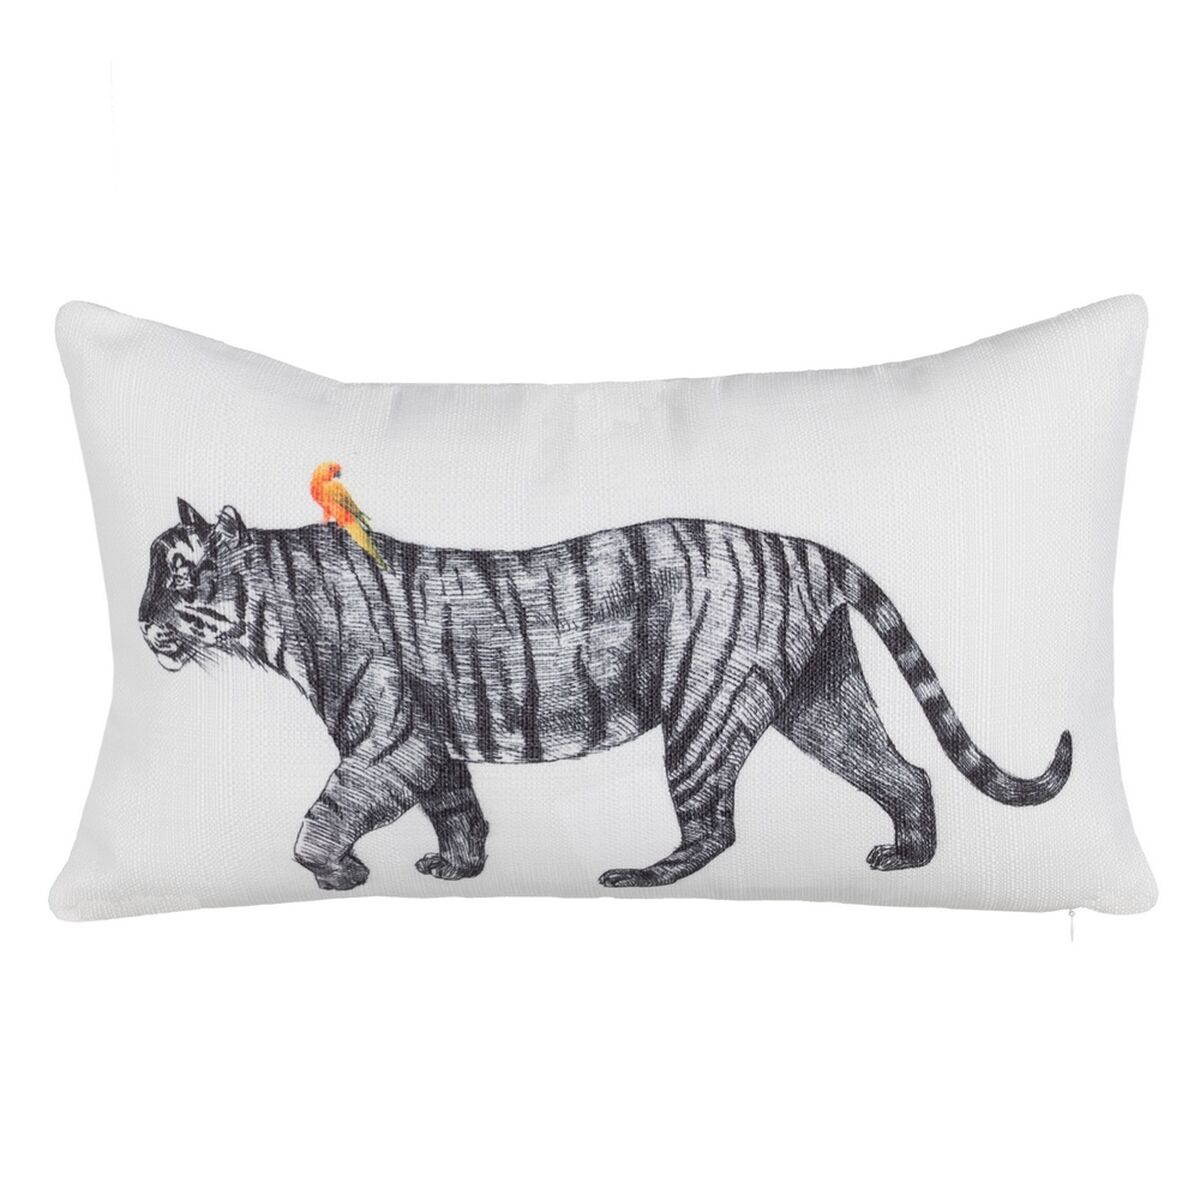 Coussin Polyester Tigre 50 x 30 cm